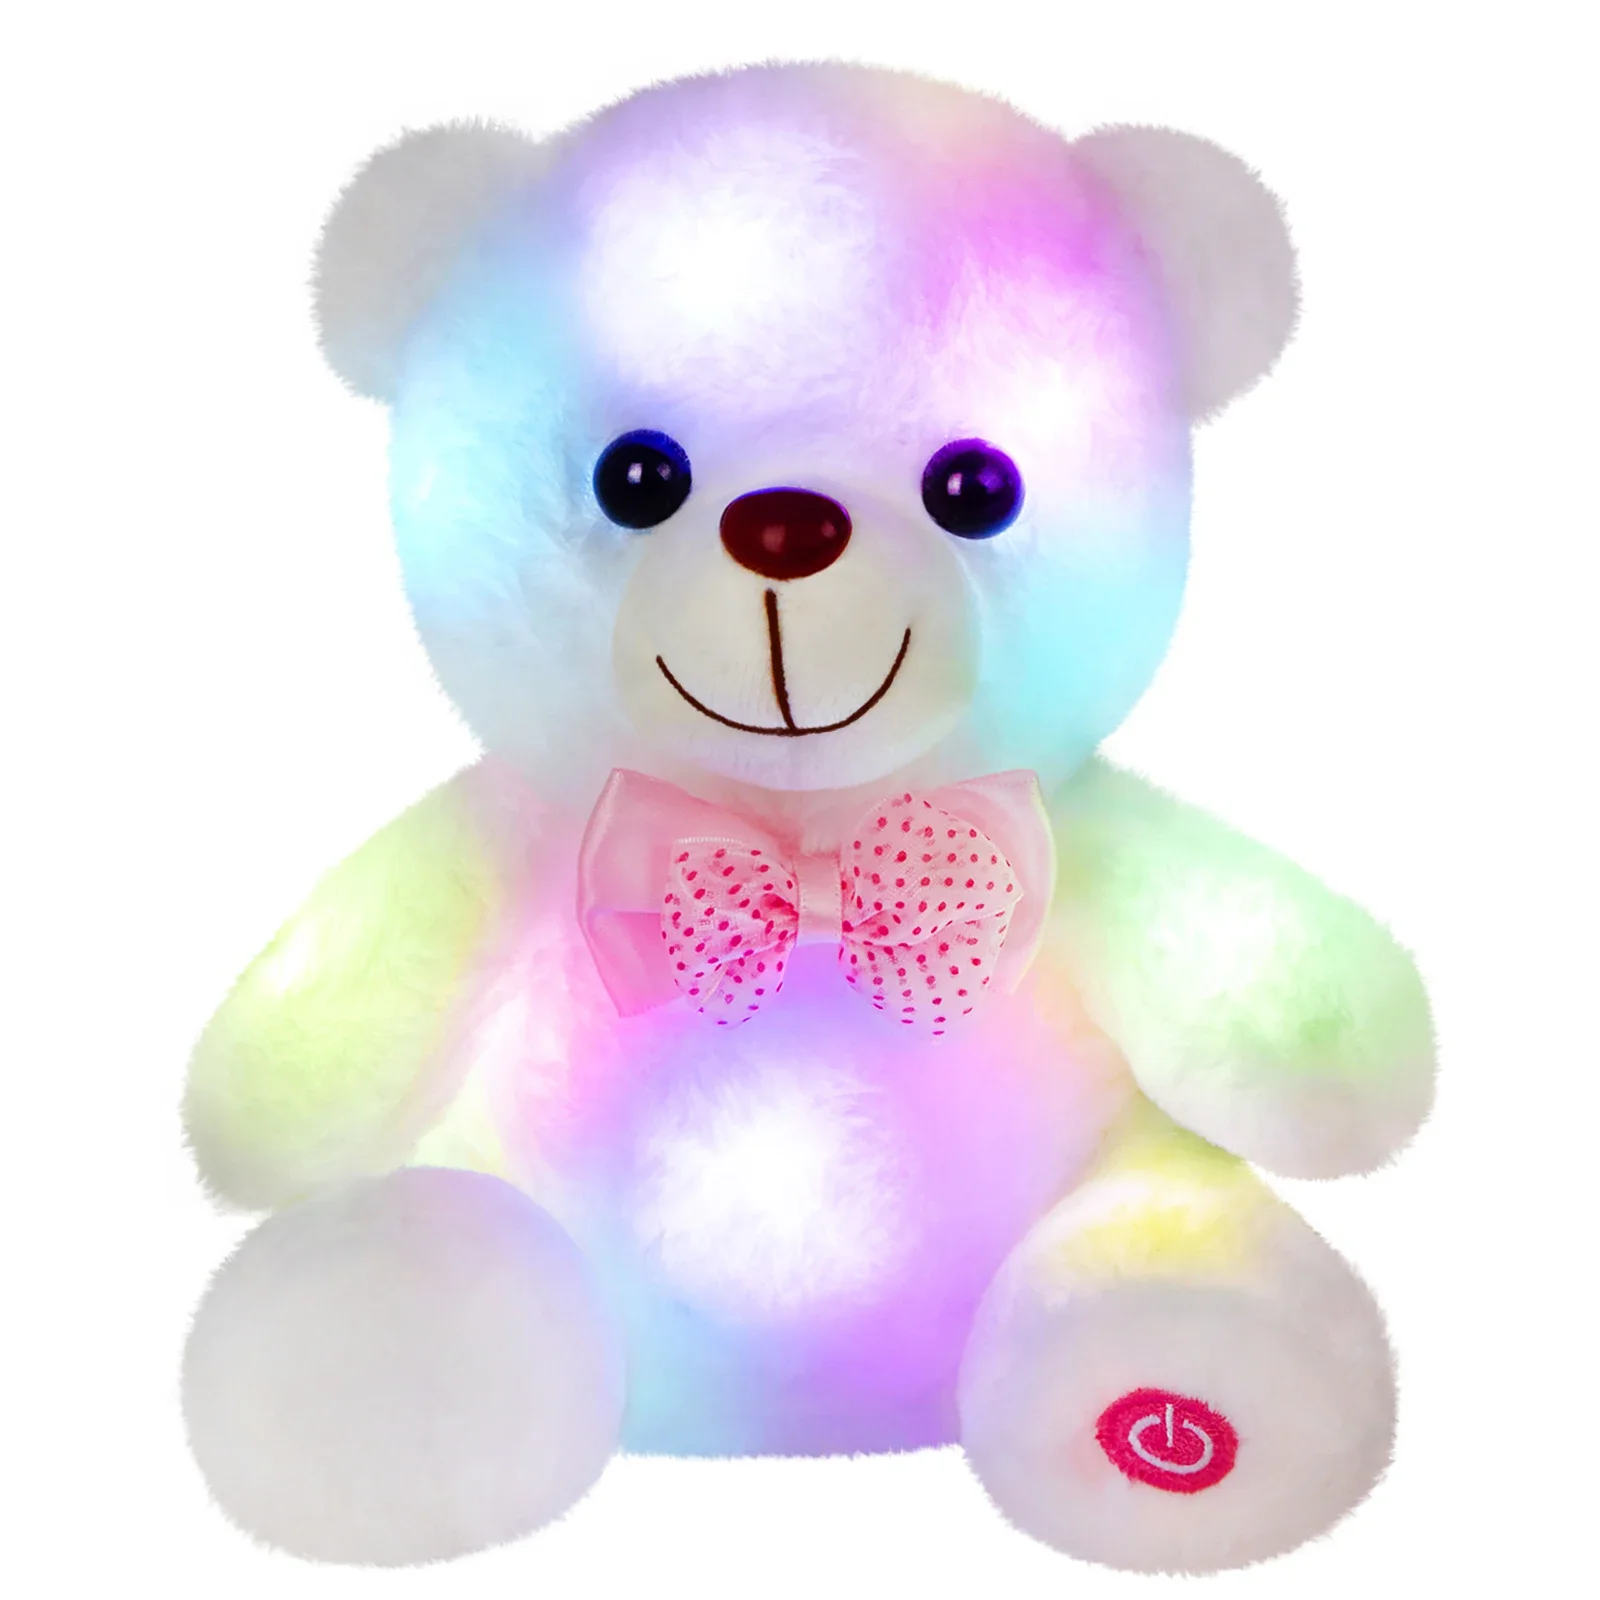 White Bear LED Light Plush Animals Easy to Clean High Quality 20cm Kawaii Doll Stuffed Toys for Girls Bed Sleeping Throw Pillows